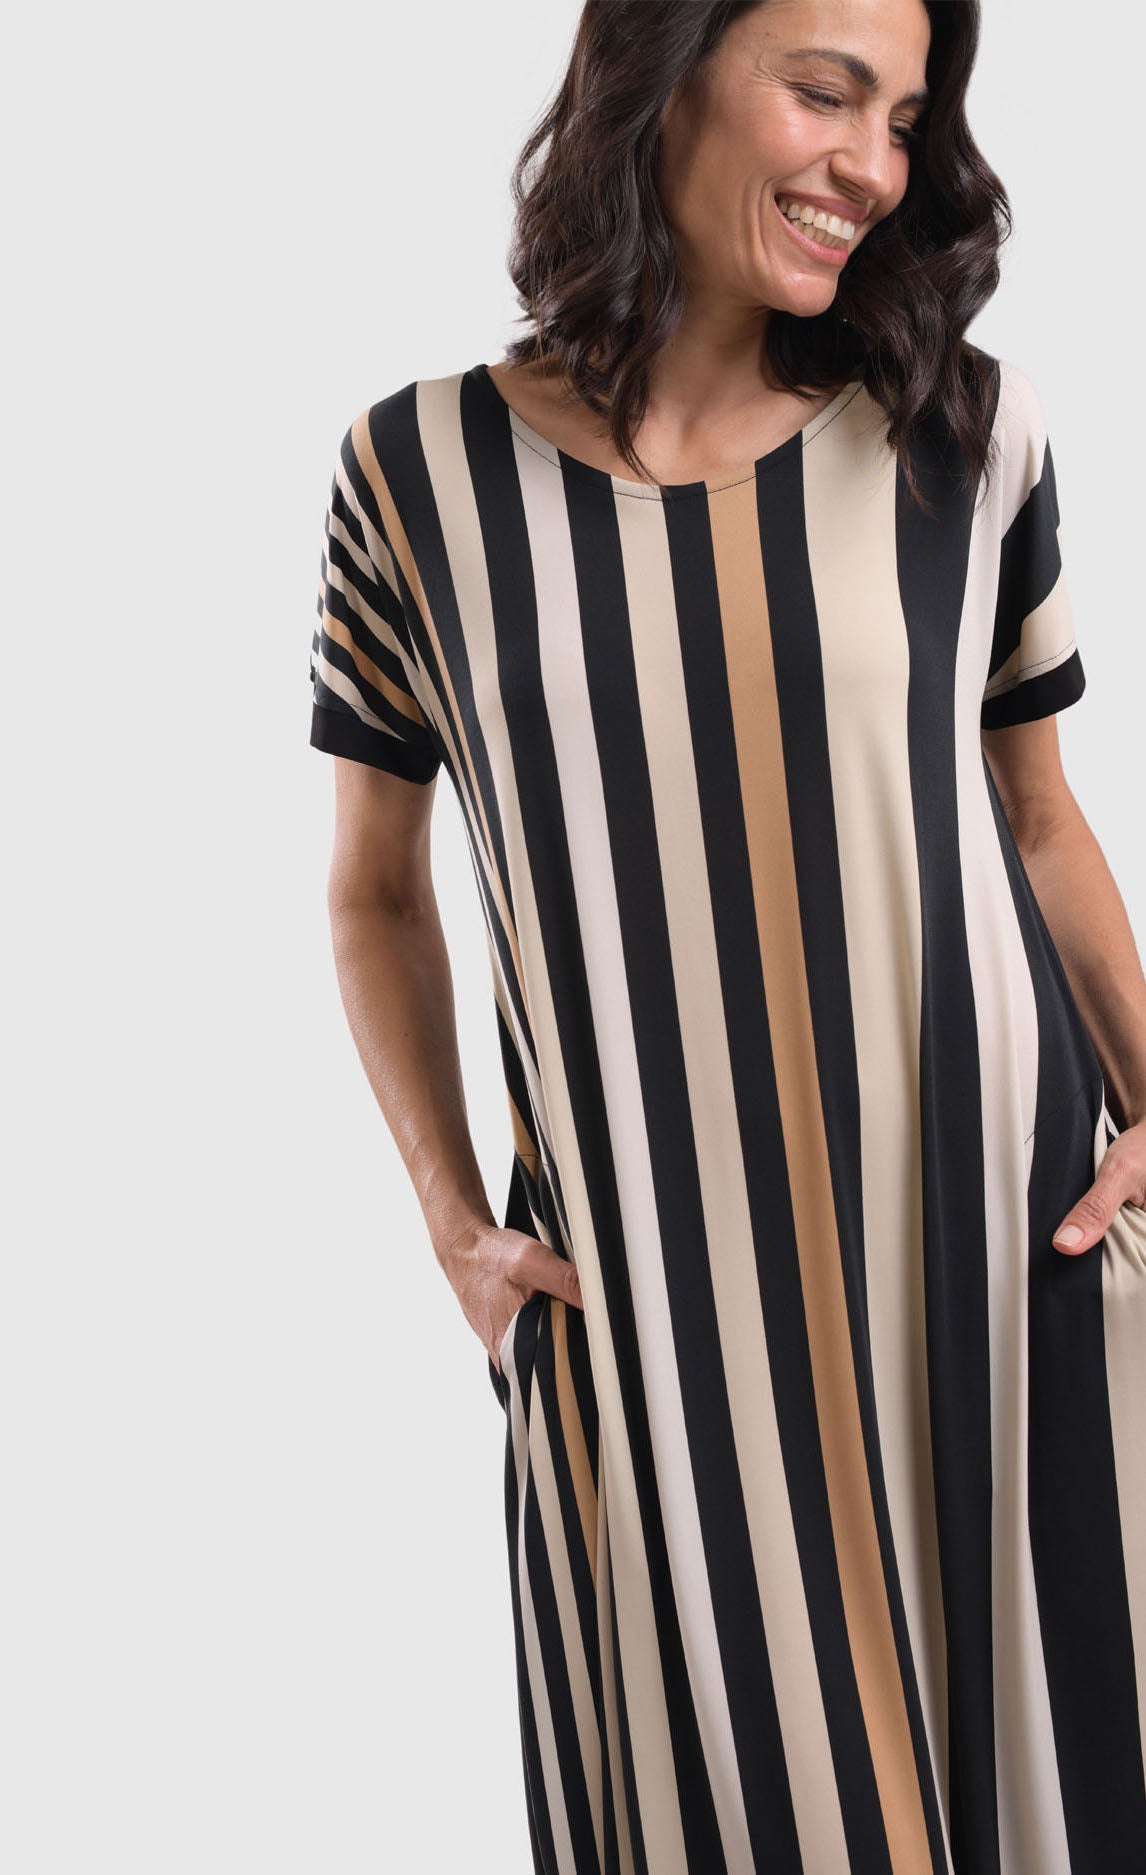 Front close up view of a woman wearing the alembika sunrise stripe dress. This dress has black and white vertical stripes with a couple of tan stripes in between. The dress has short sleeves, a relaxed silhouette with a poof skirt, and two side pockets. 